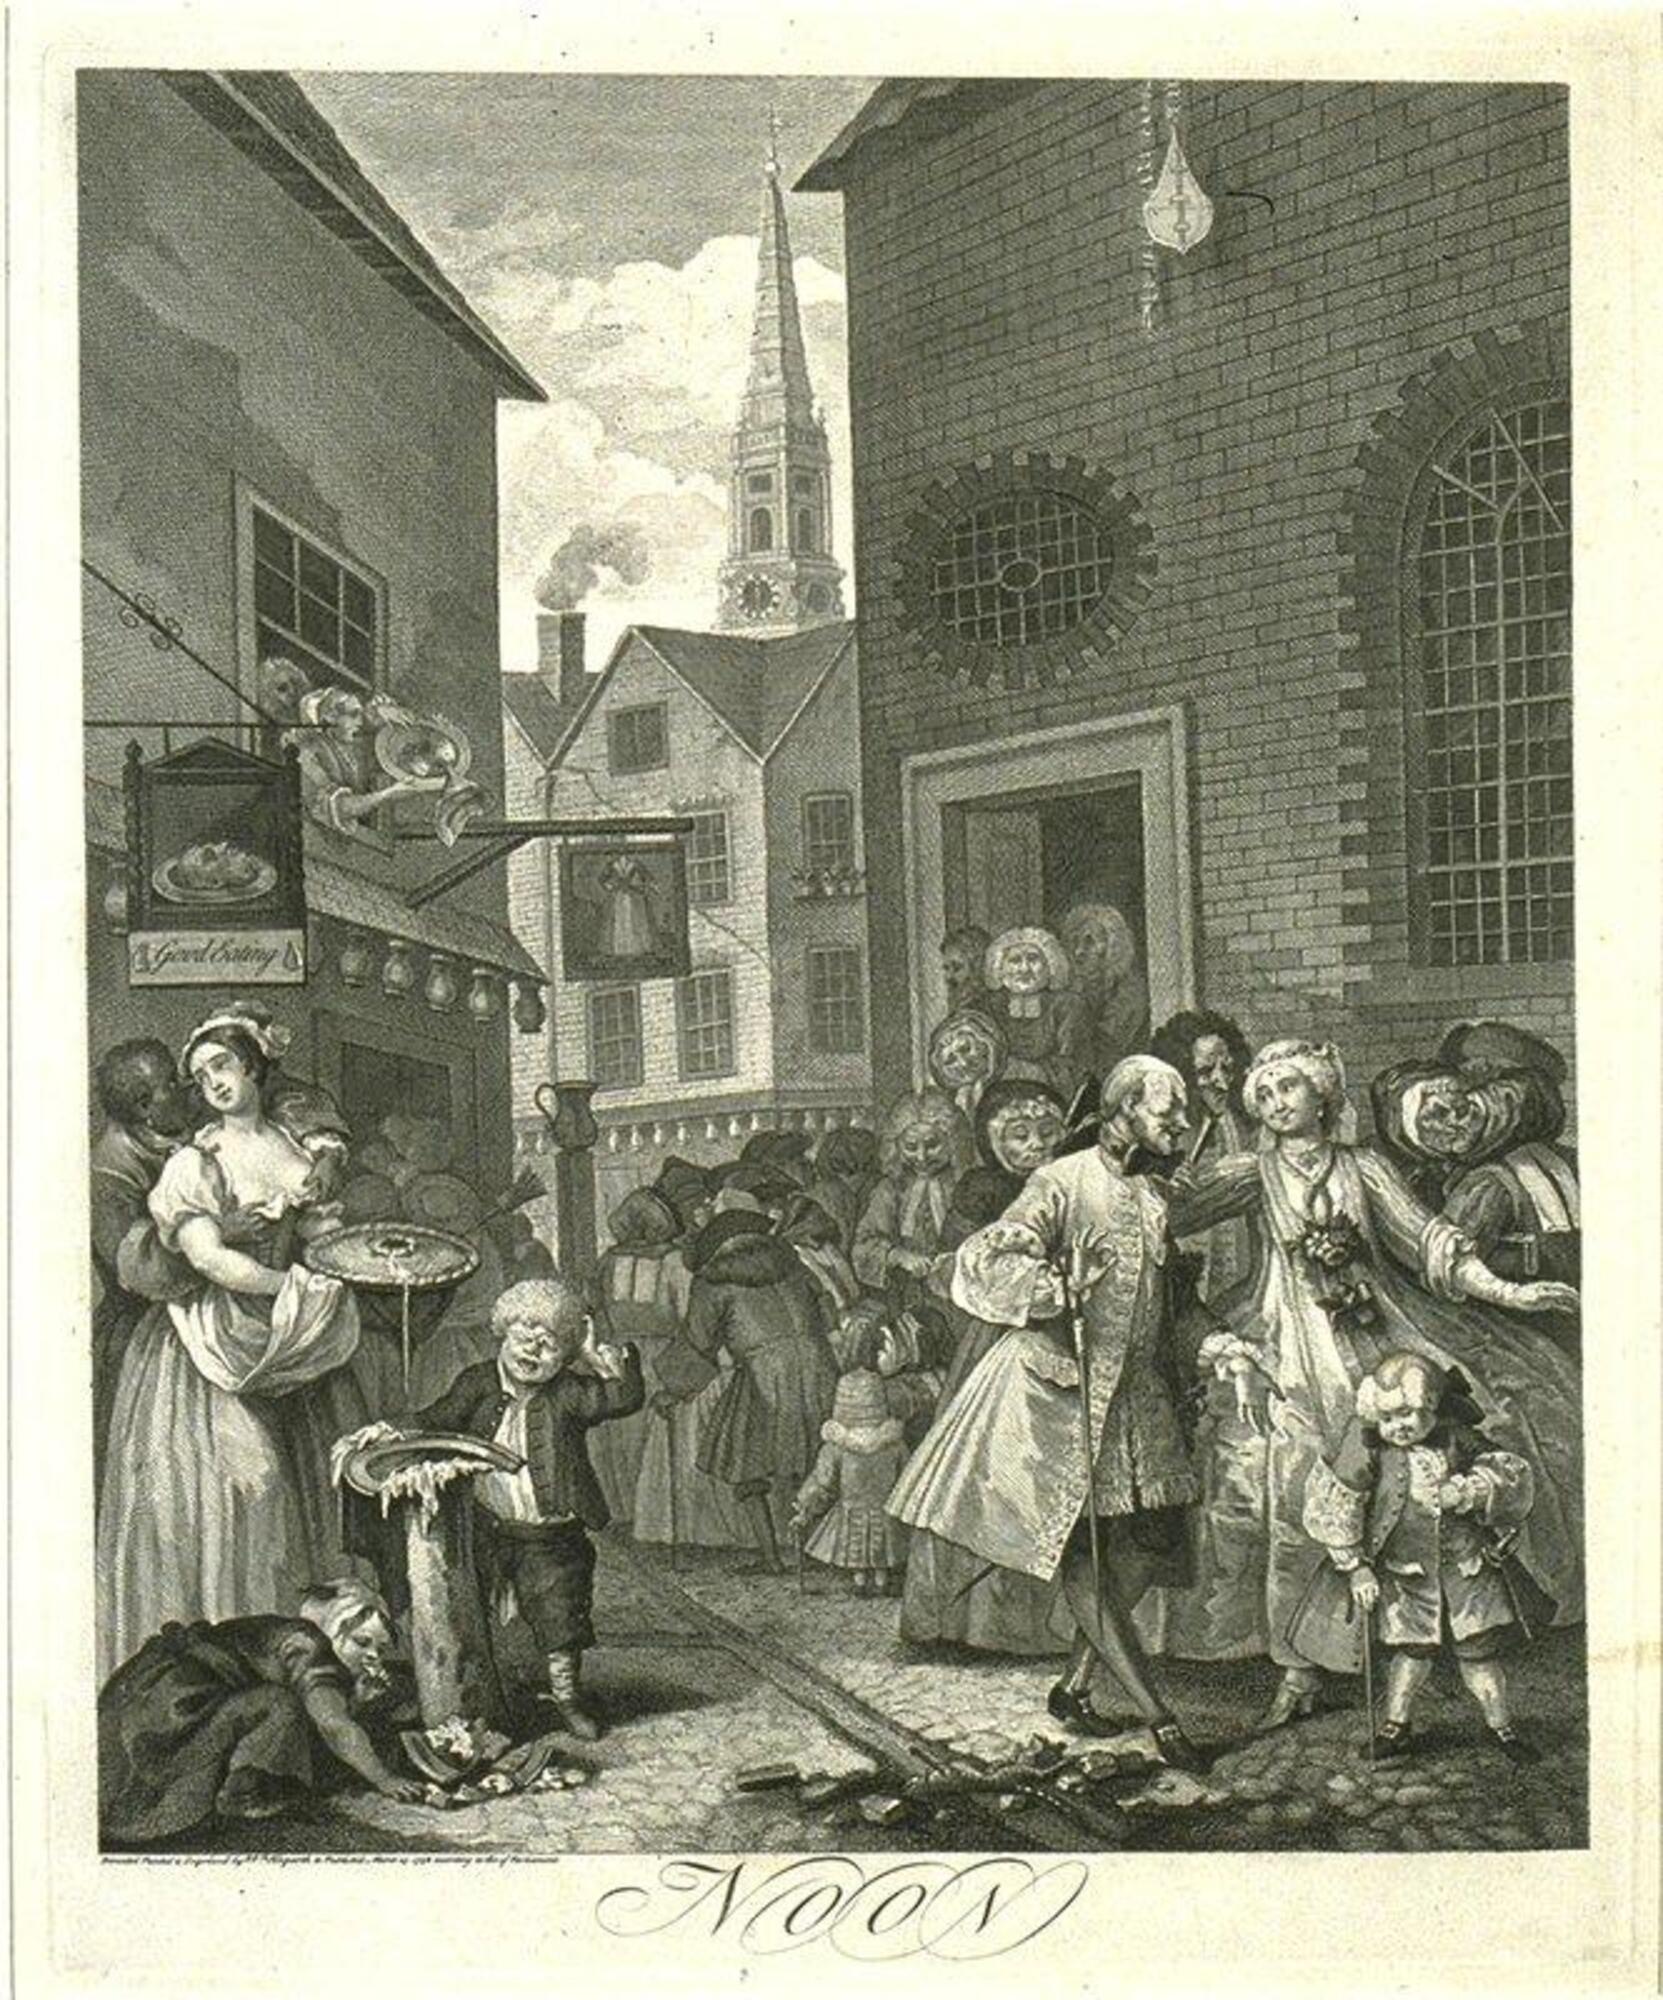 This print is vertically oriented with gray markings.  A cream border surrounds it and it has “NOON” written below it.  The lower half of the print has a busy street scene with lots of adults and children in 18th century garb.  The upper half shows the top of the buildings that line the street, including a shop, a brick building, and a church steeple in the distance.<br />